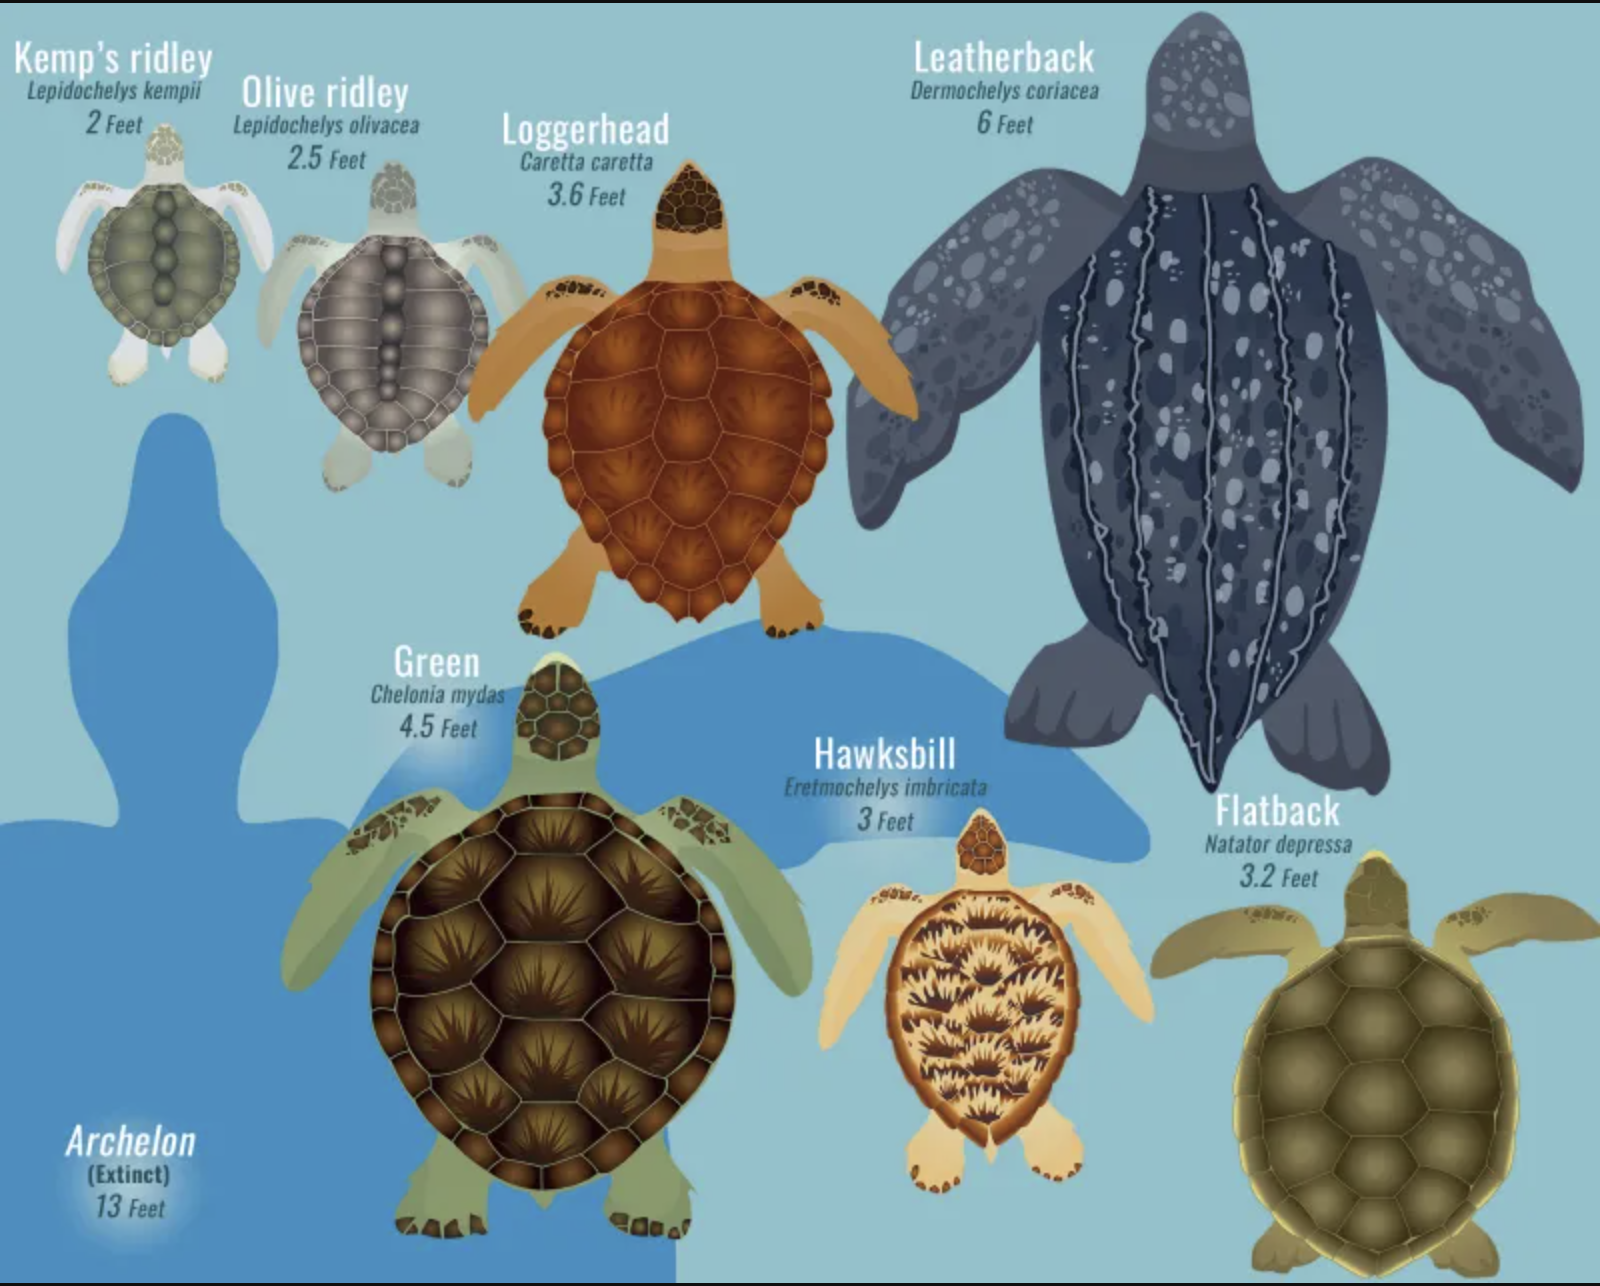 Image of the seven sea turtle species comparing their sizes